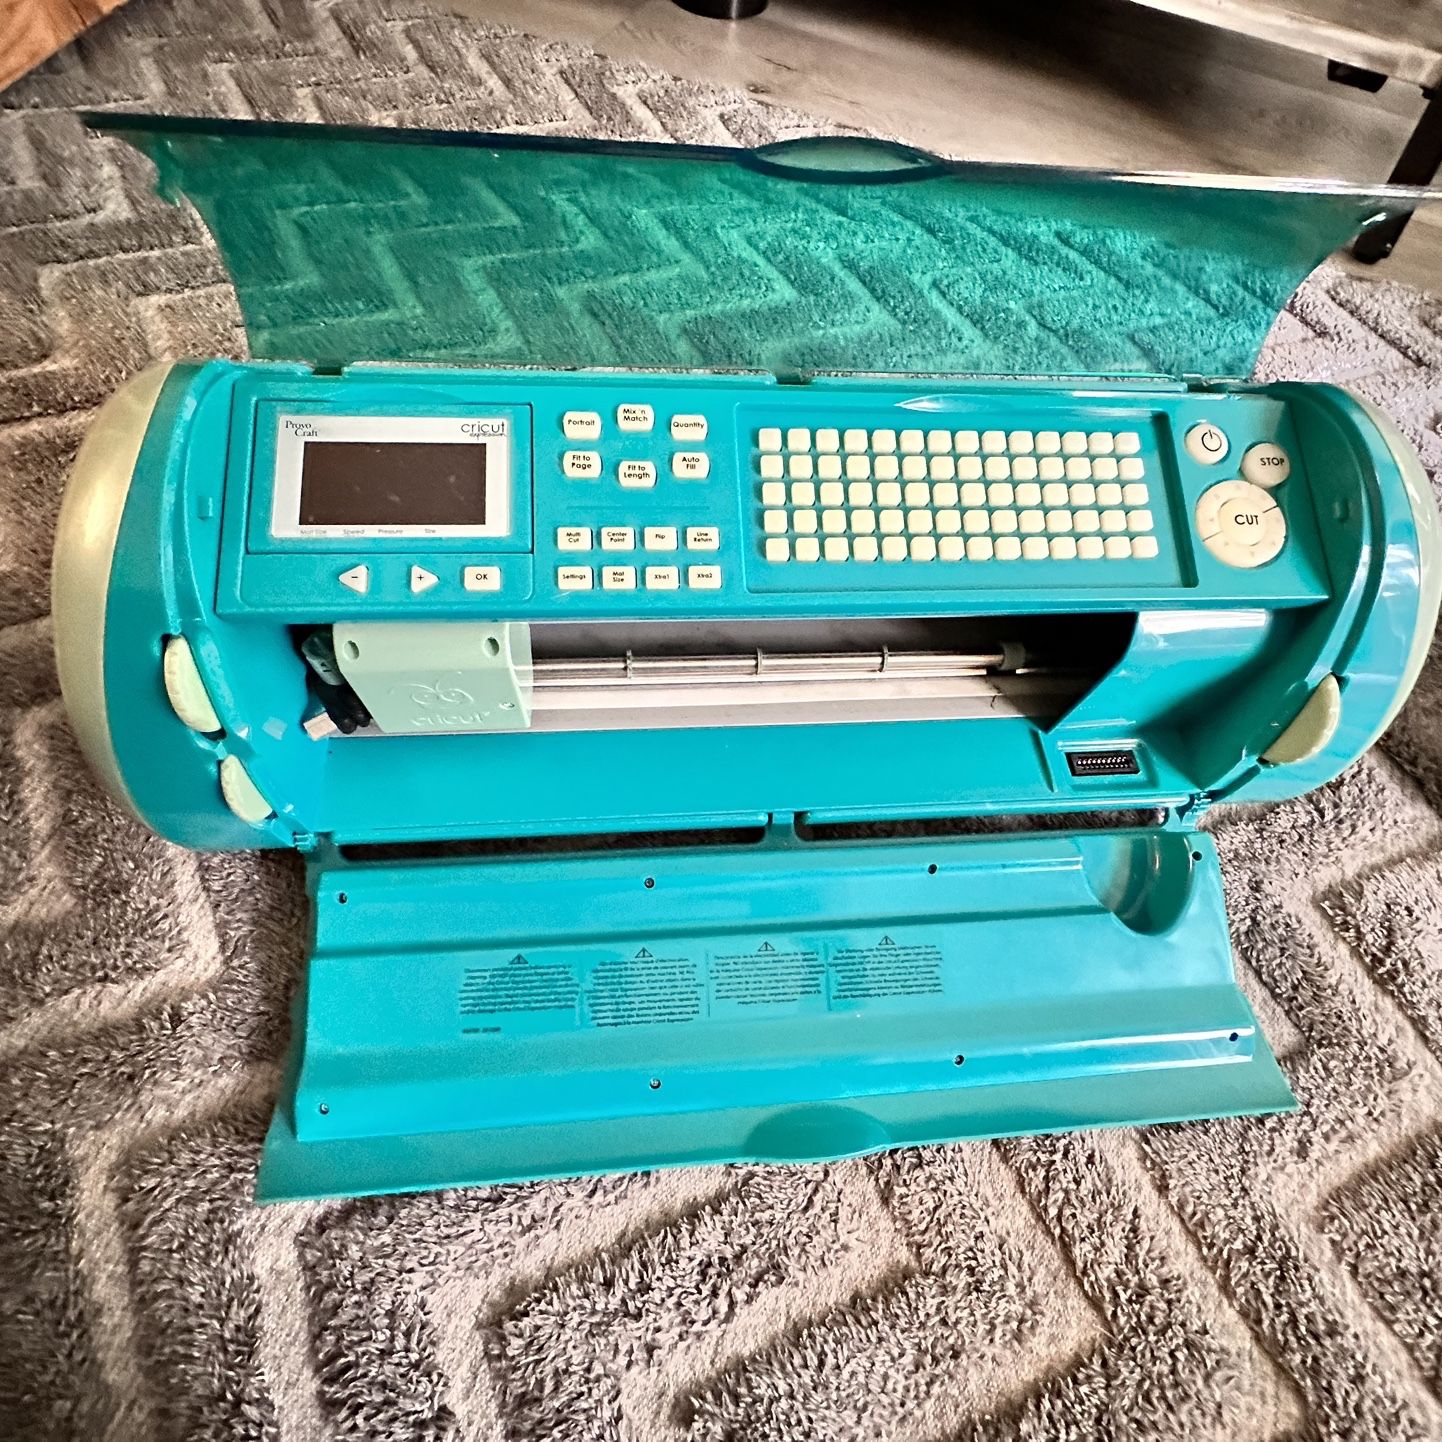 Best Cricut Expression Machine And Supplies for sale in Quincy